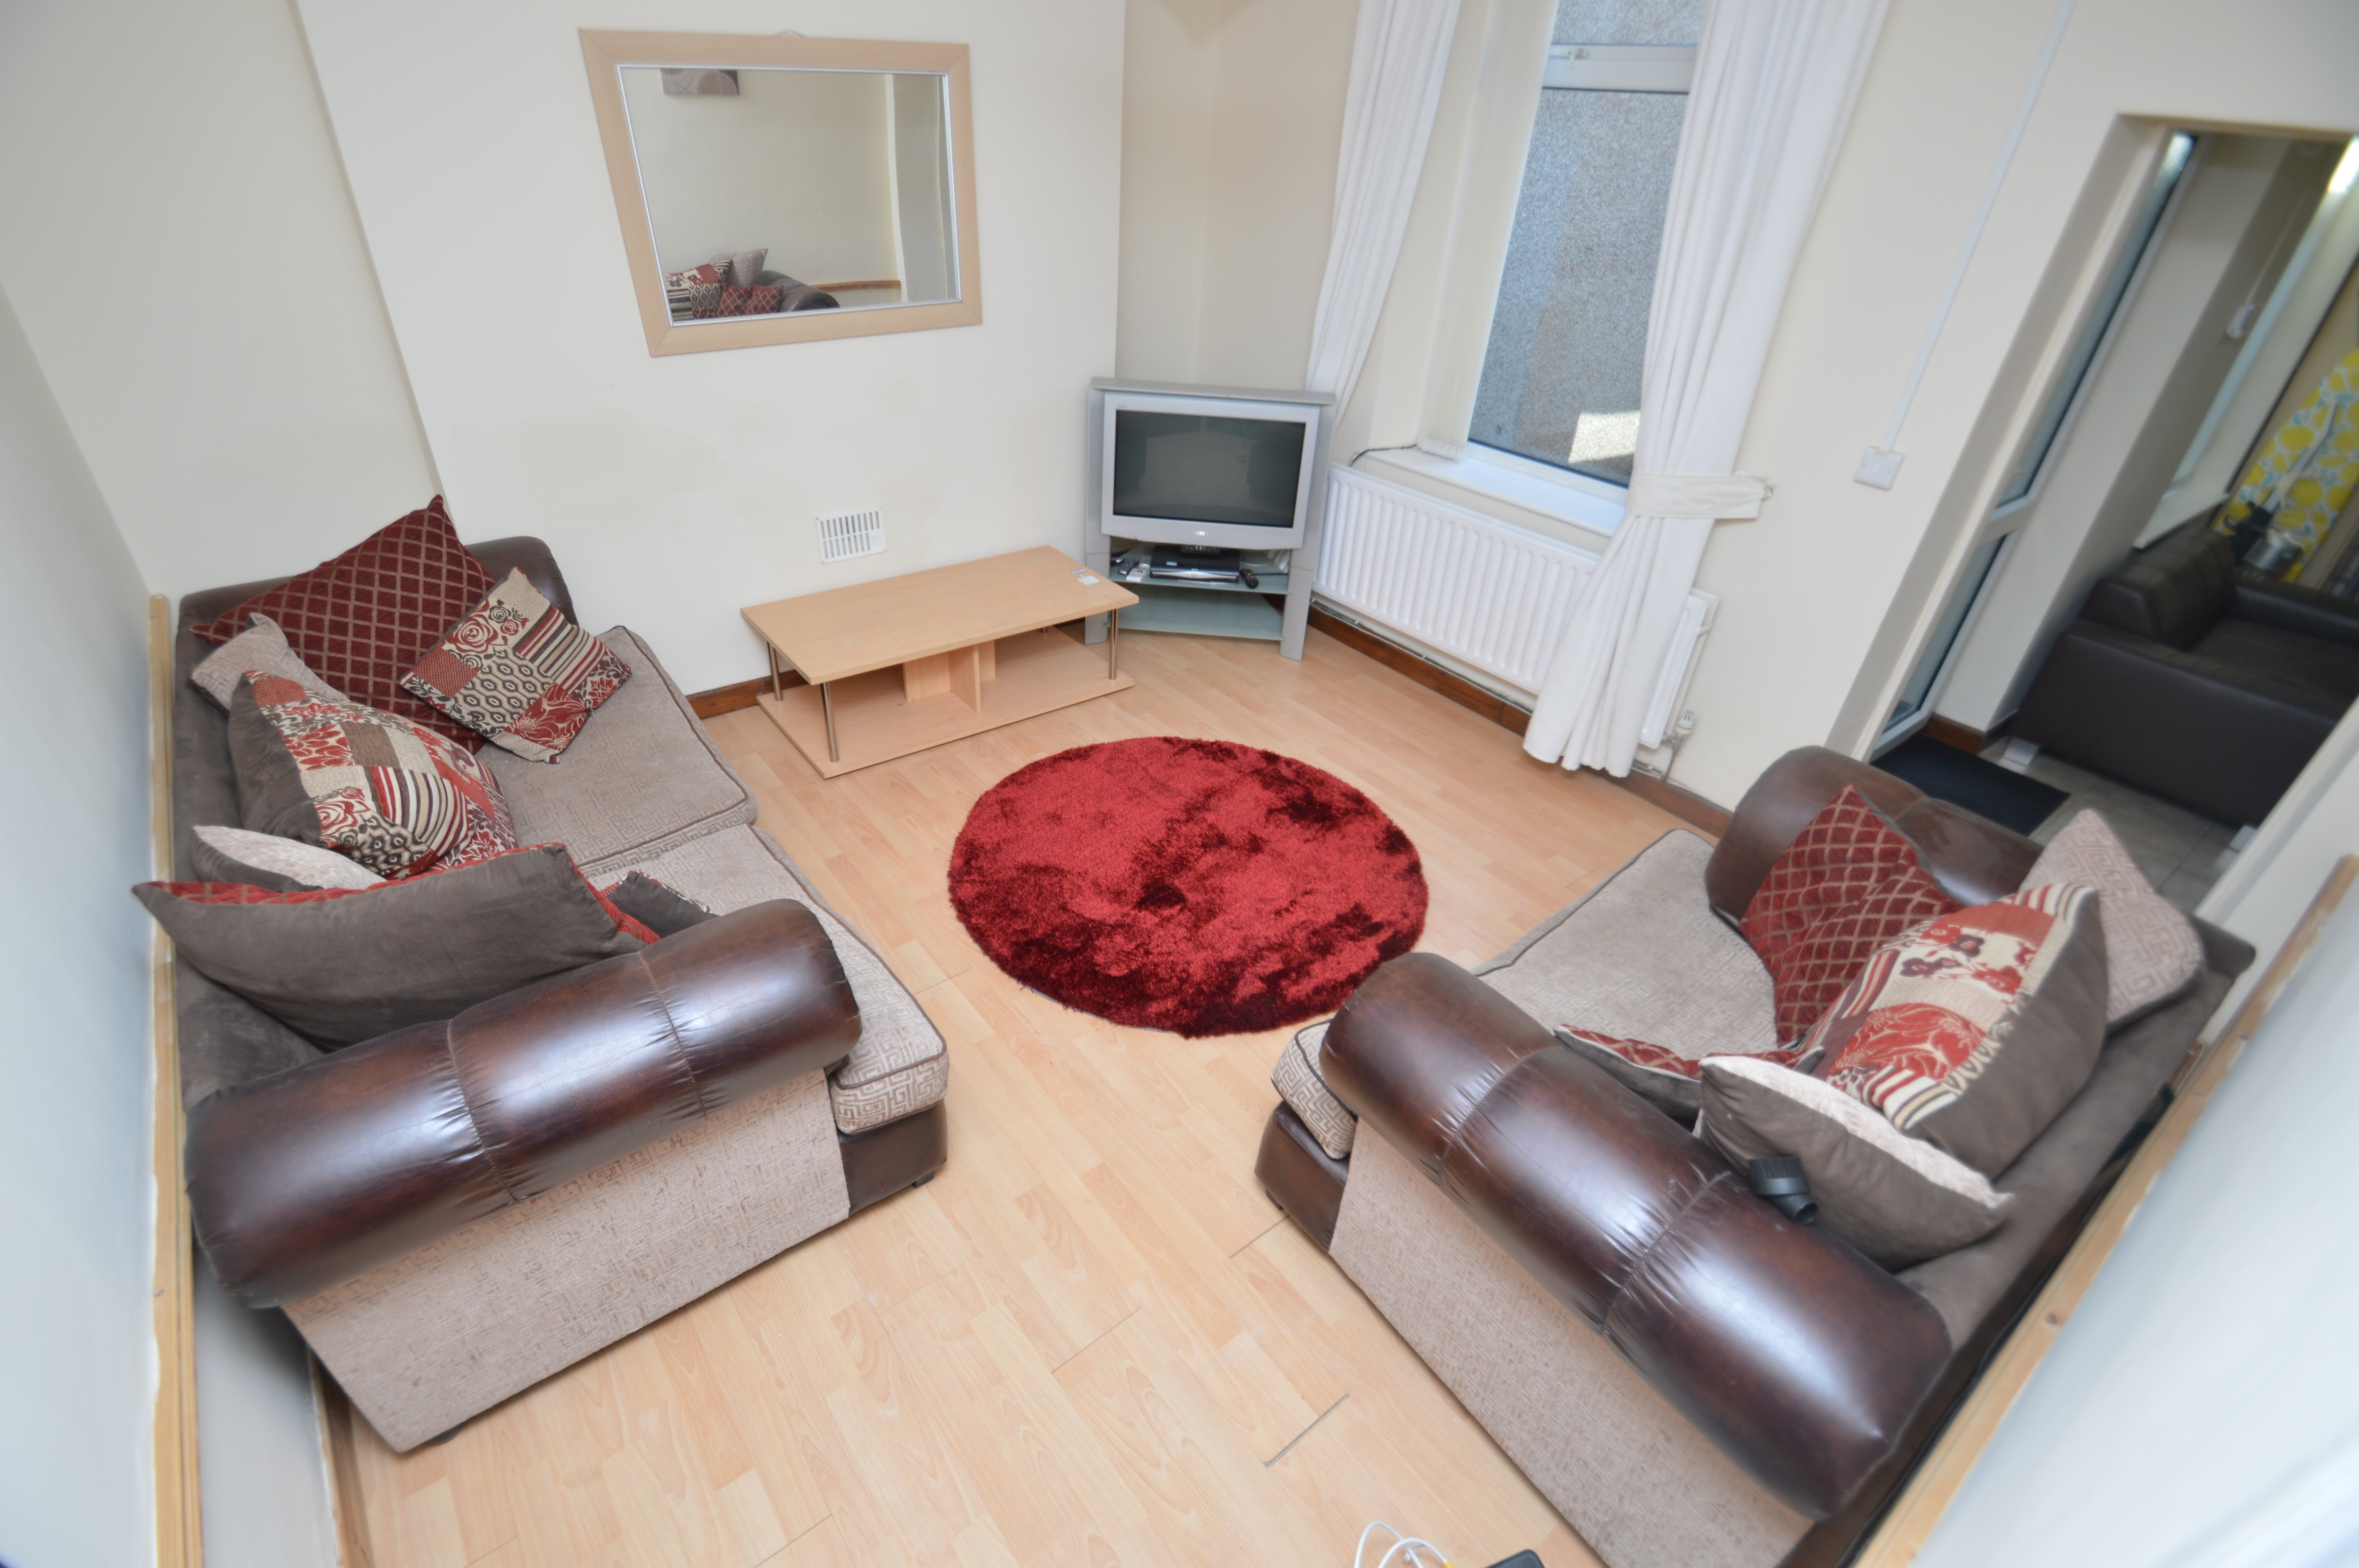 1 bed house / flat share to rent in Wood Road, Treforest  - Property Image 3